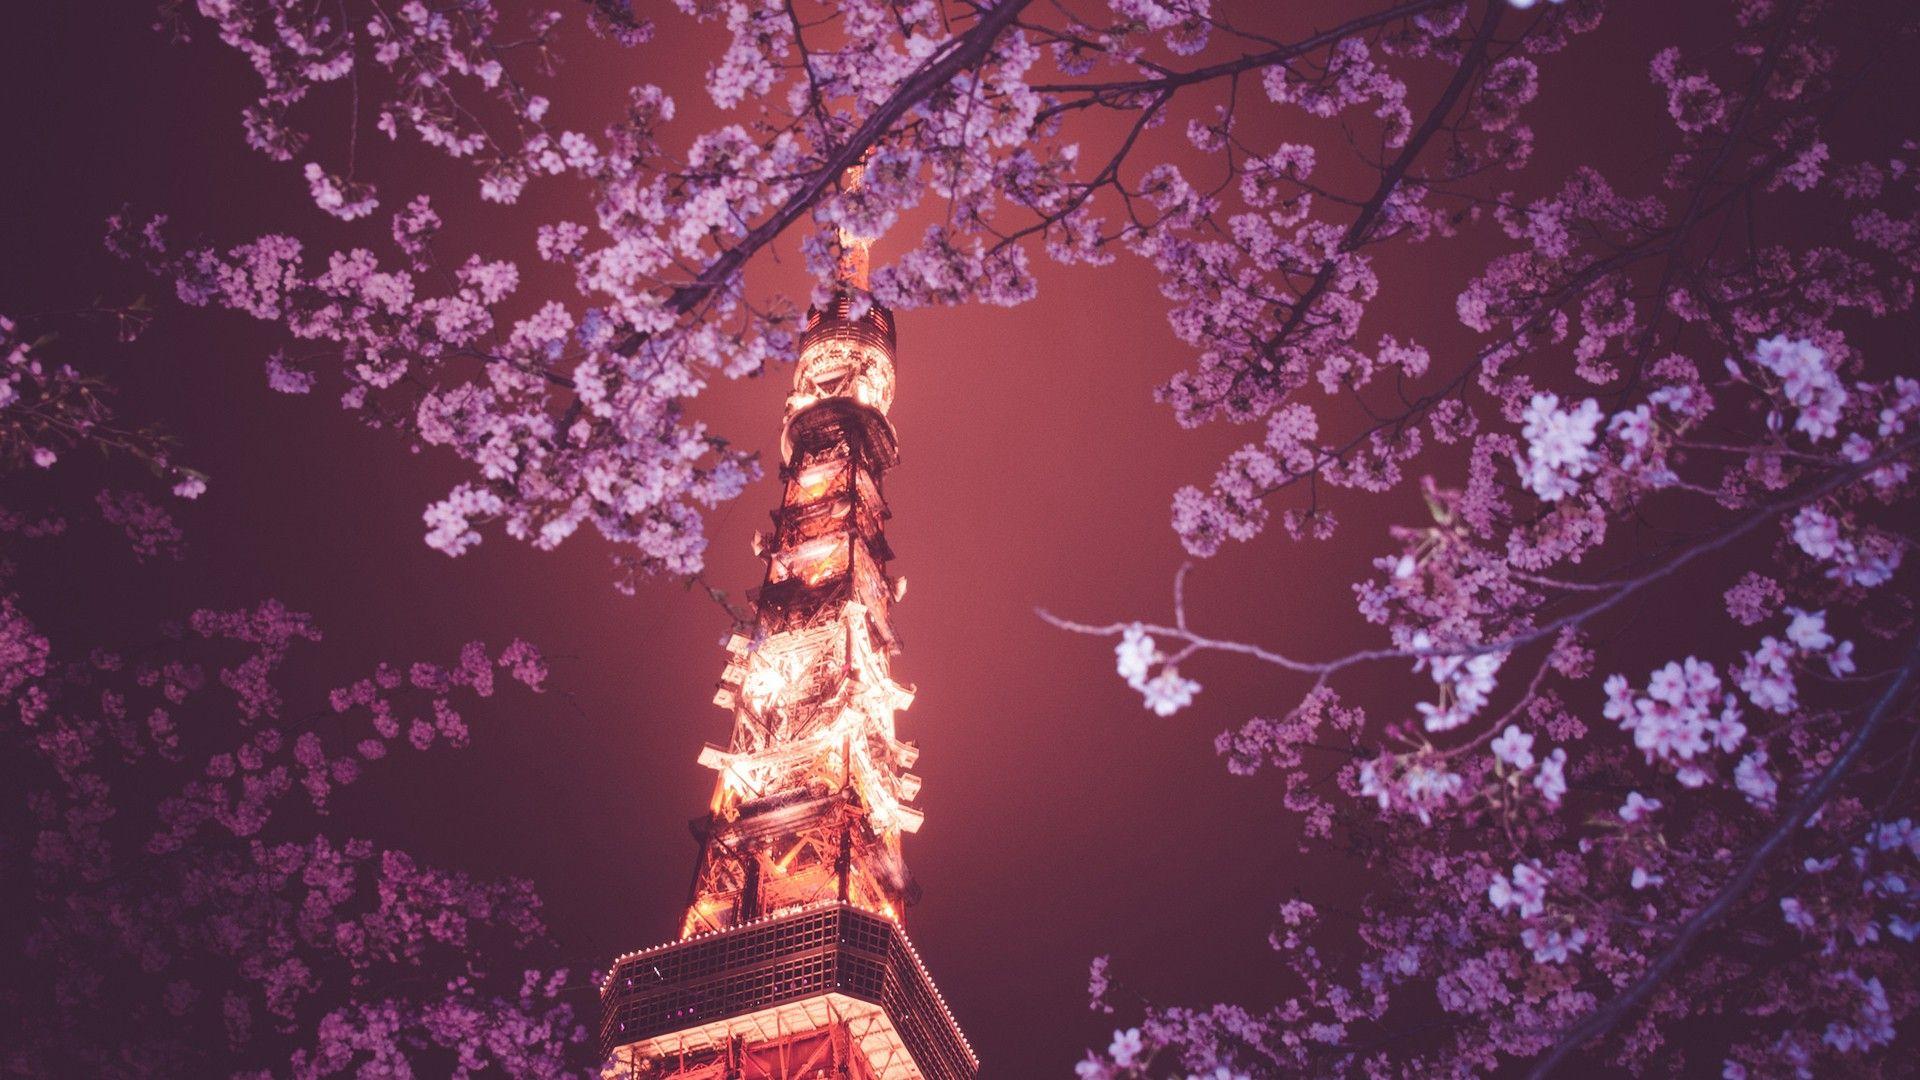 Cherry Blossom Tree At Night Wallpapers Top Free Cherry Blossom Tree At Night Backgrounds Wallpaperaccess